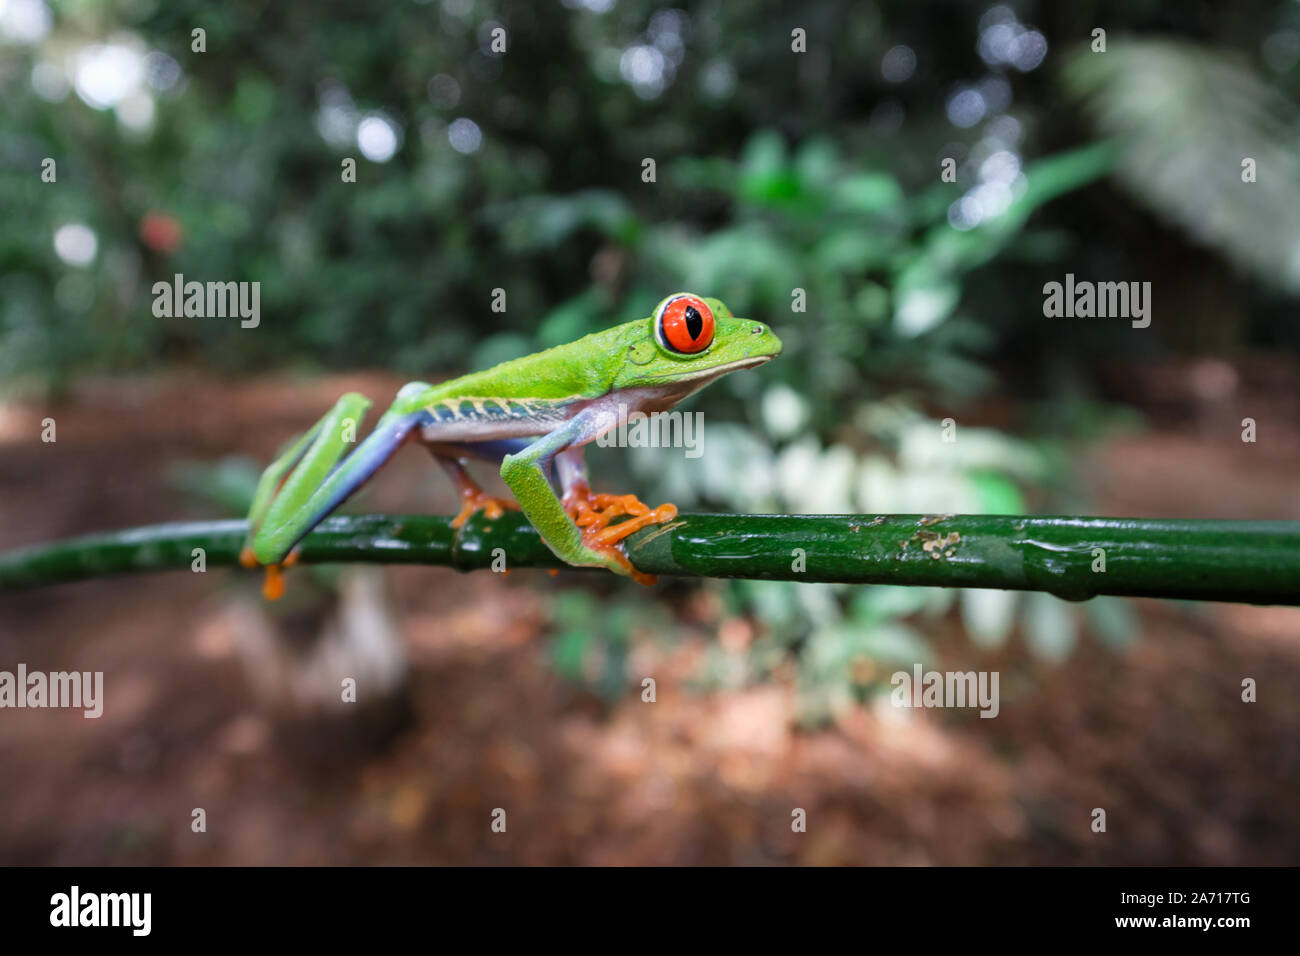 Costa Rican Red Eyed Treefrog (Agalychnis callidryas) on a tree branch. Frogs Heaven, Costa Rica, Central America. Stock Photo